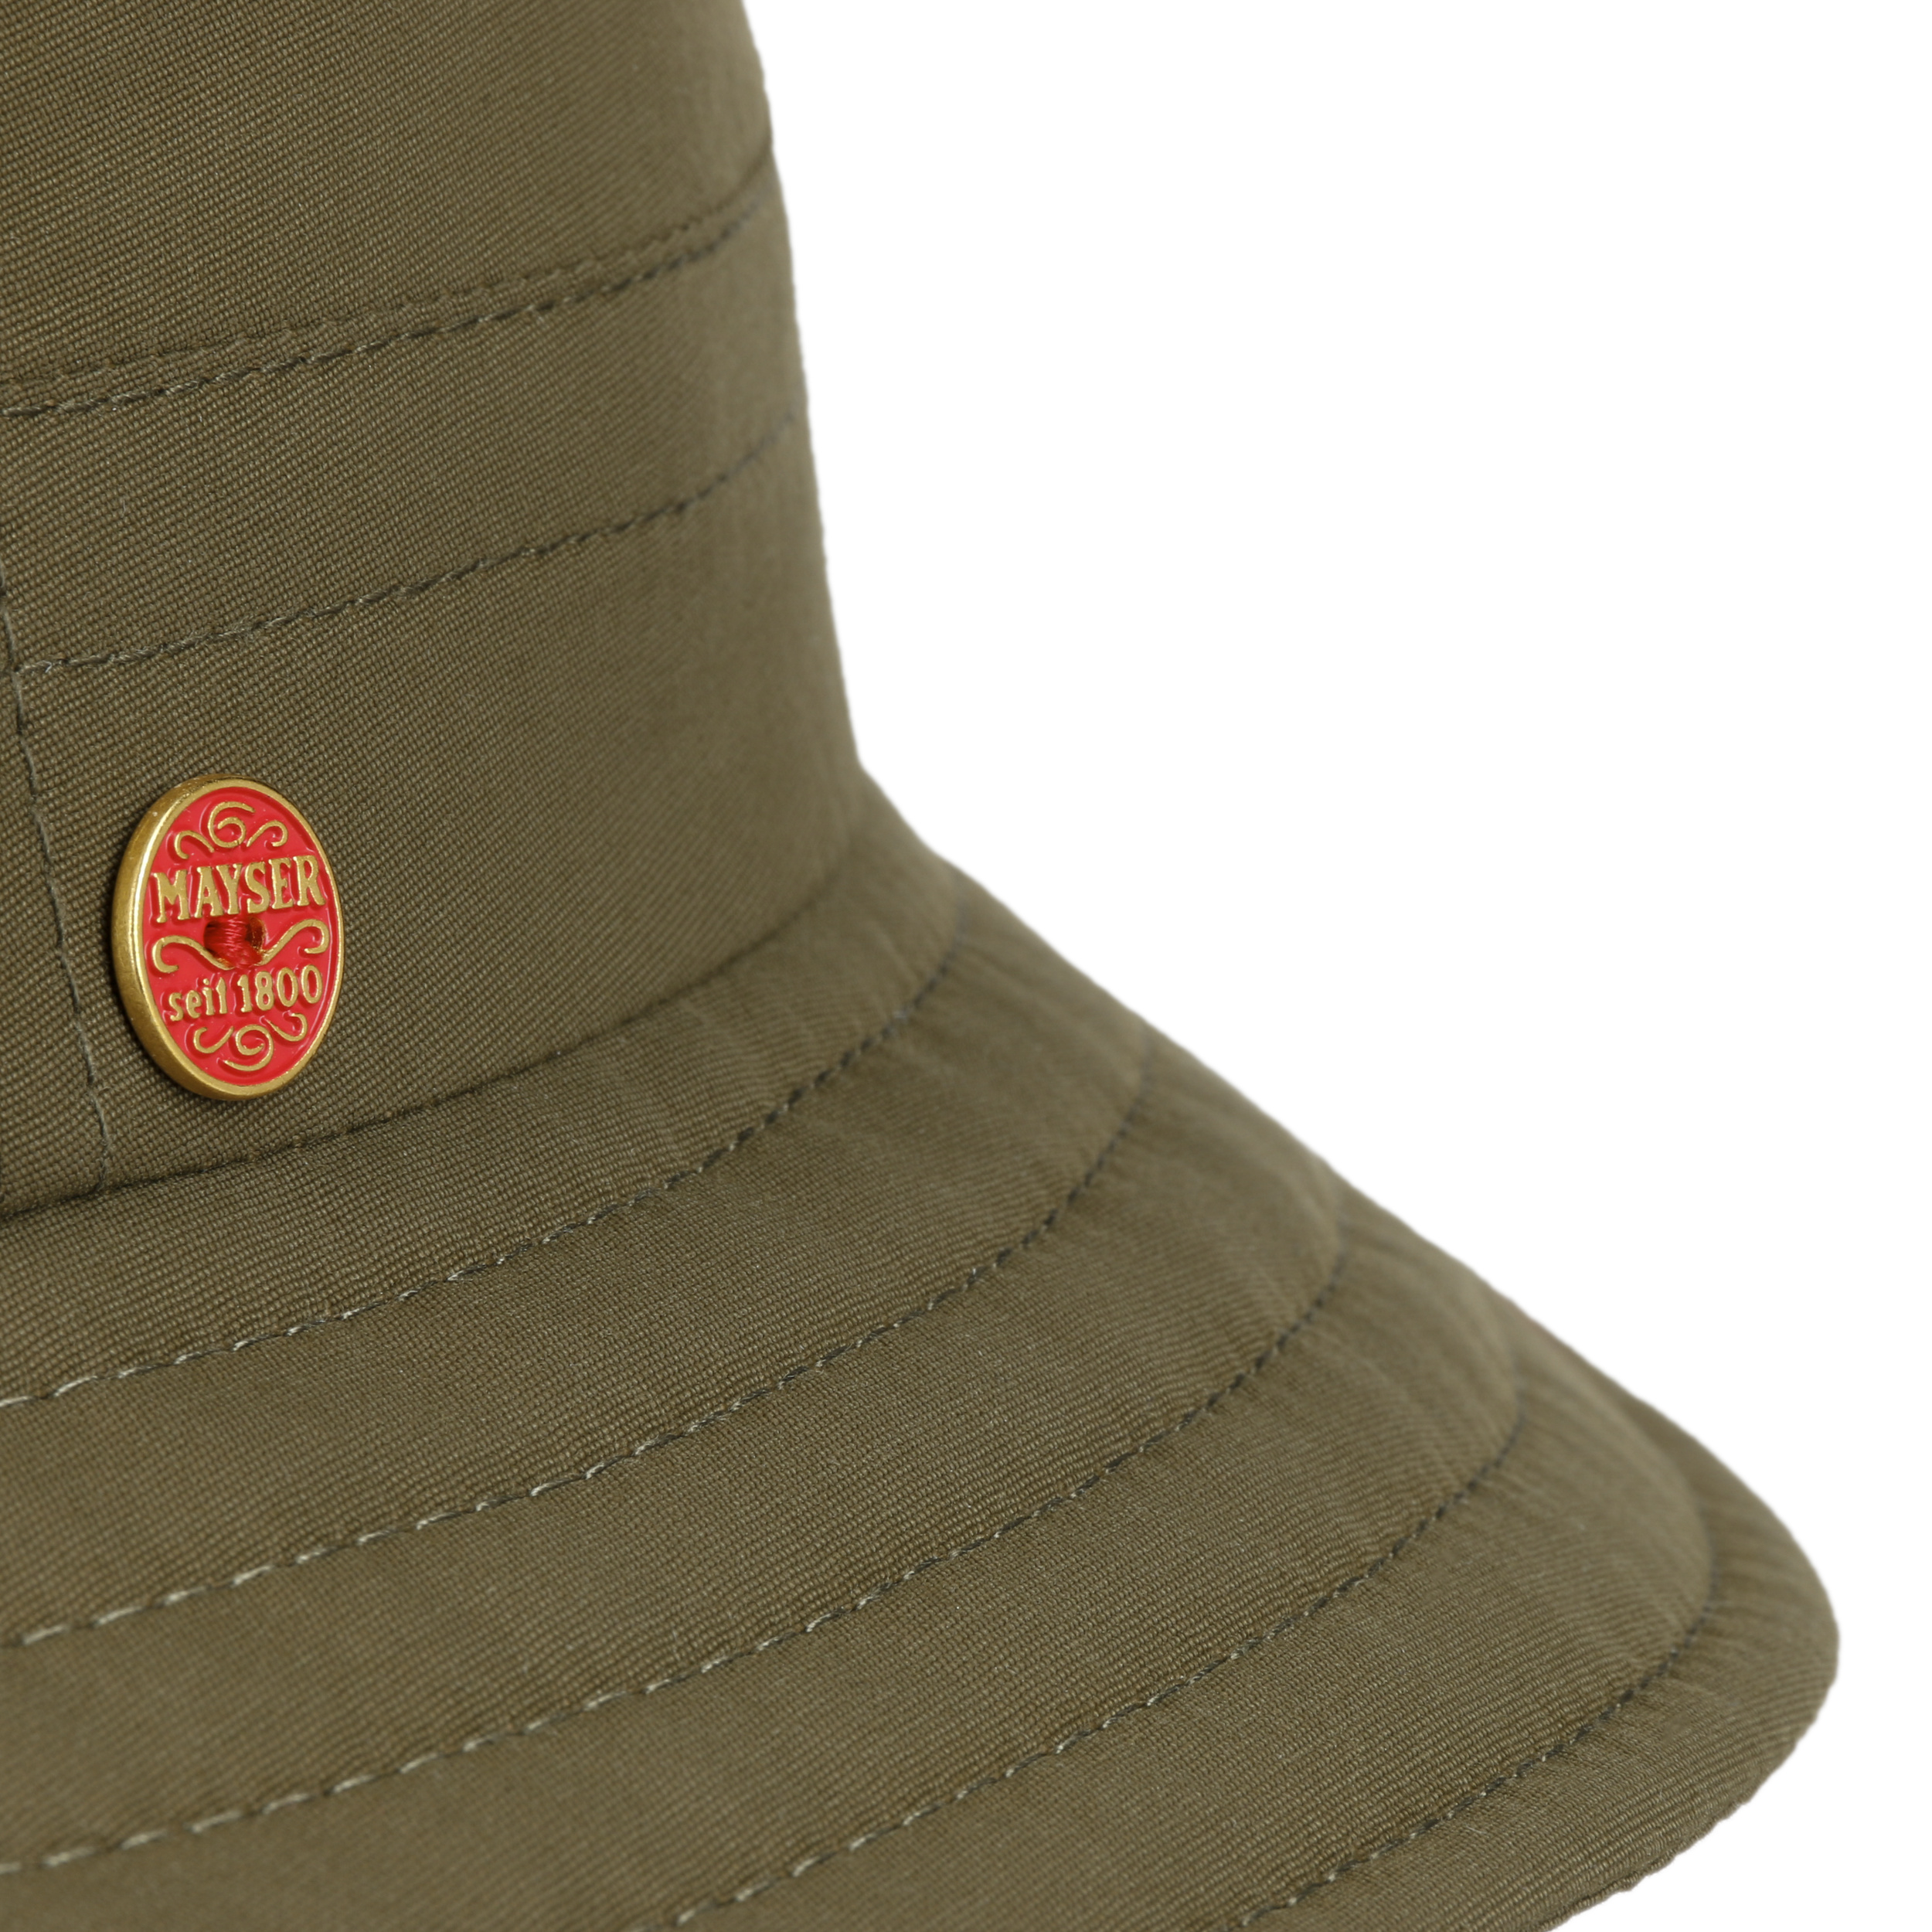 Protection 72,95 Hat Sun UV - by Mayser €